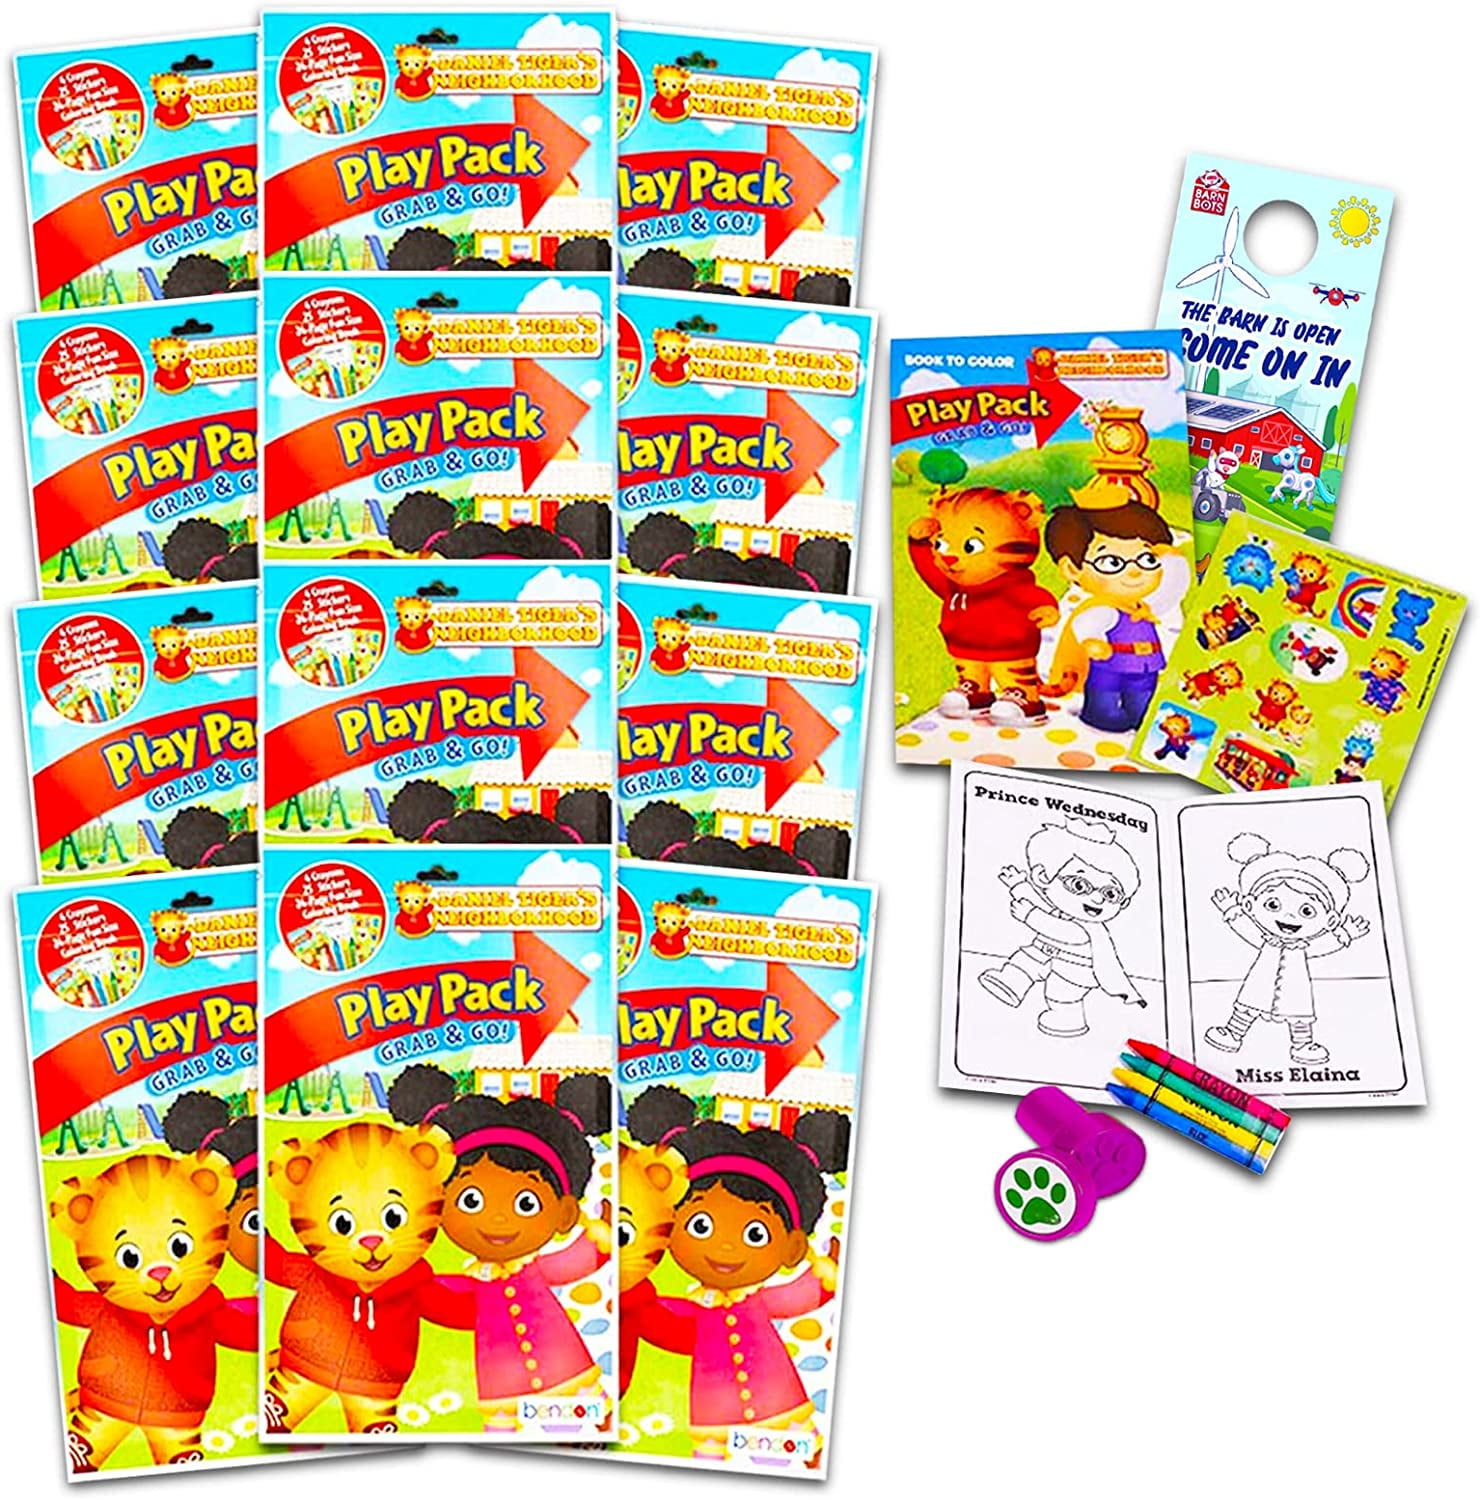  Nick Shop Paw Patrol Mini Party Favors Set for Kids - Bundle  with 24 Grab n Go Play Packs Coloring Pages, Stickers and More (Paw Birthday  Supplies) : Toys & Games